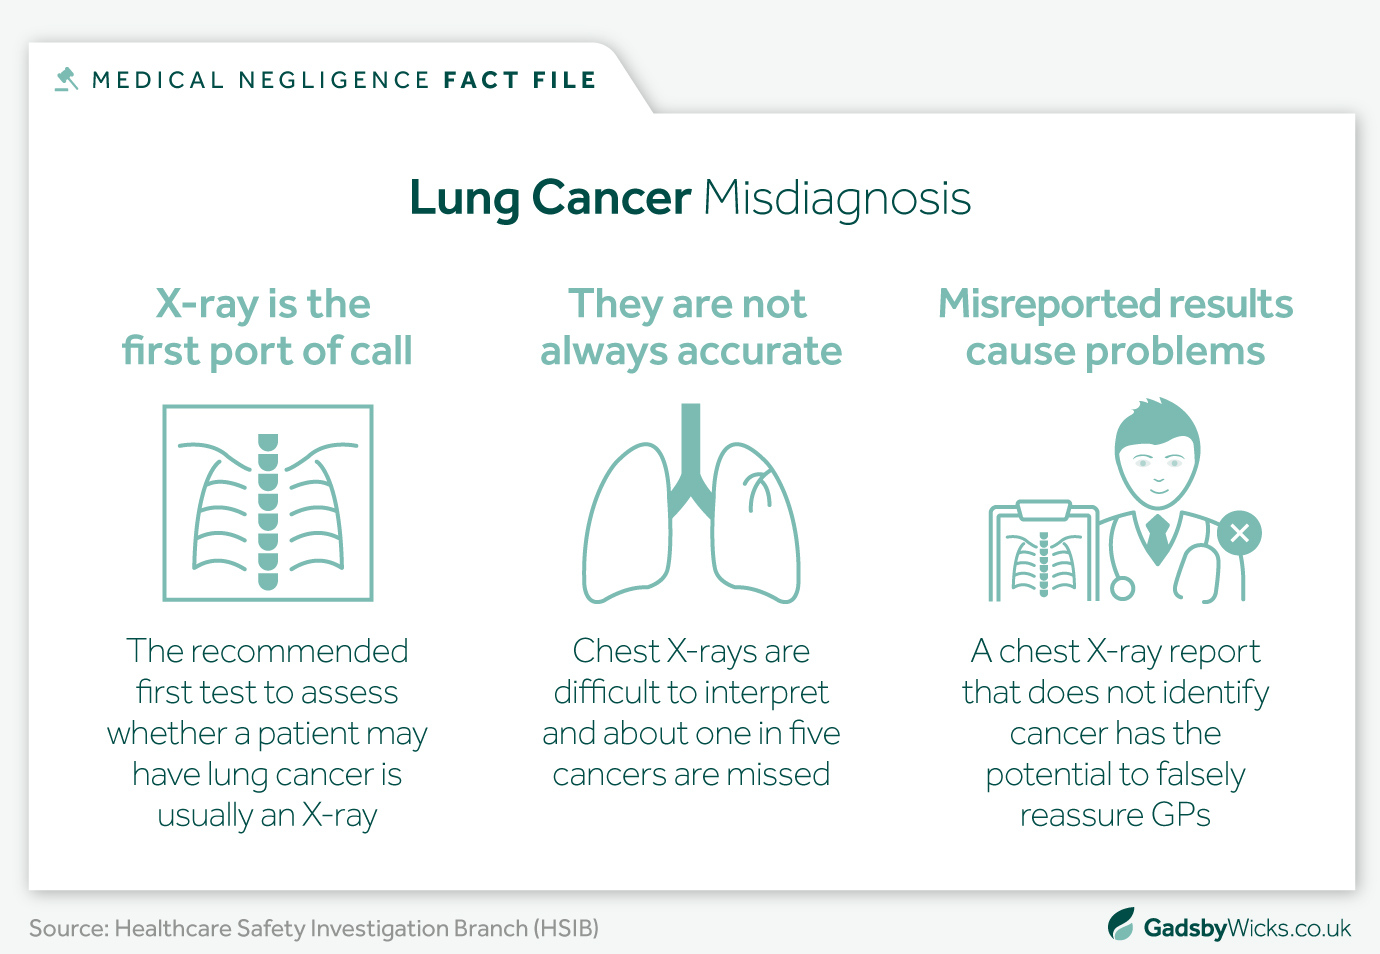 Lung cancer misdiagnosis reasons infographic image using HSIB data